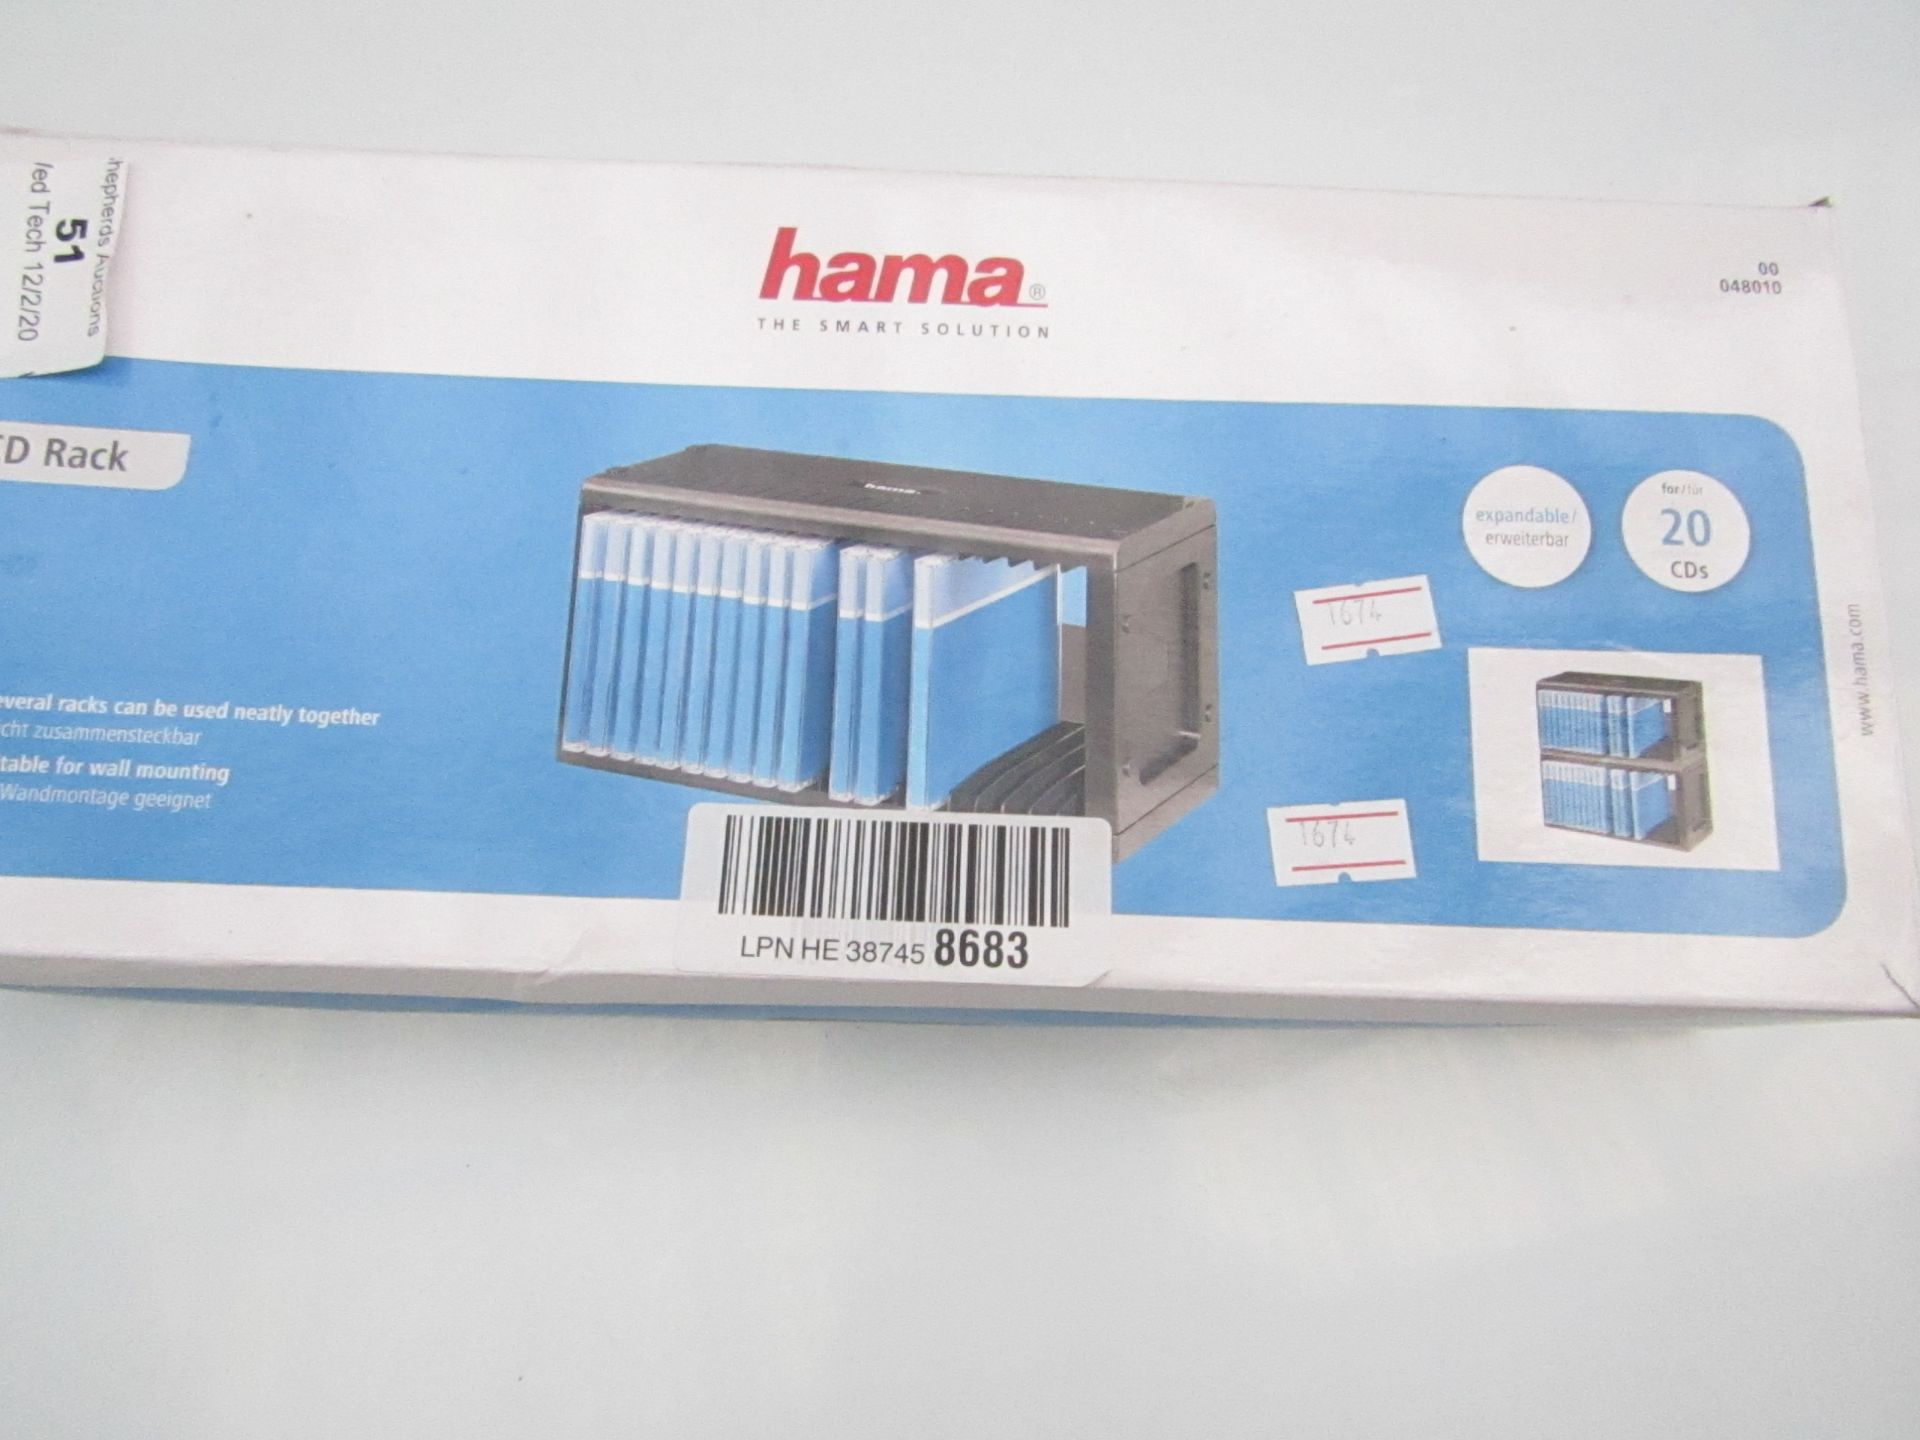 Hama CD rack, unchecked and boxed.